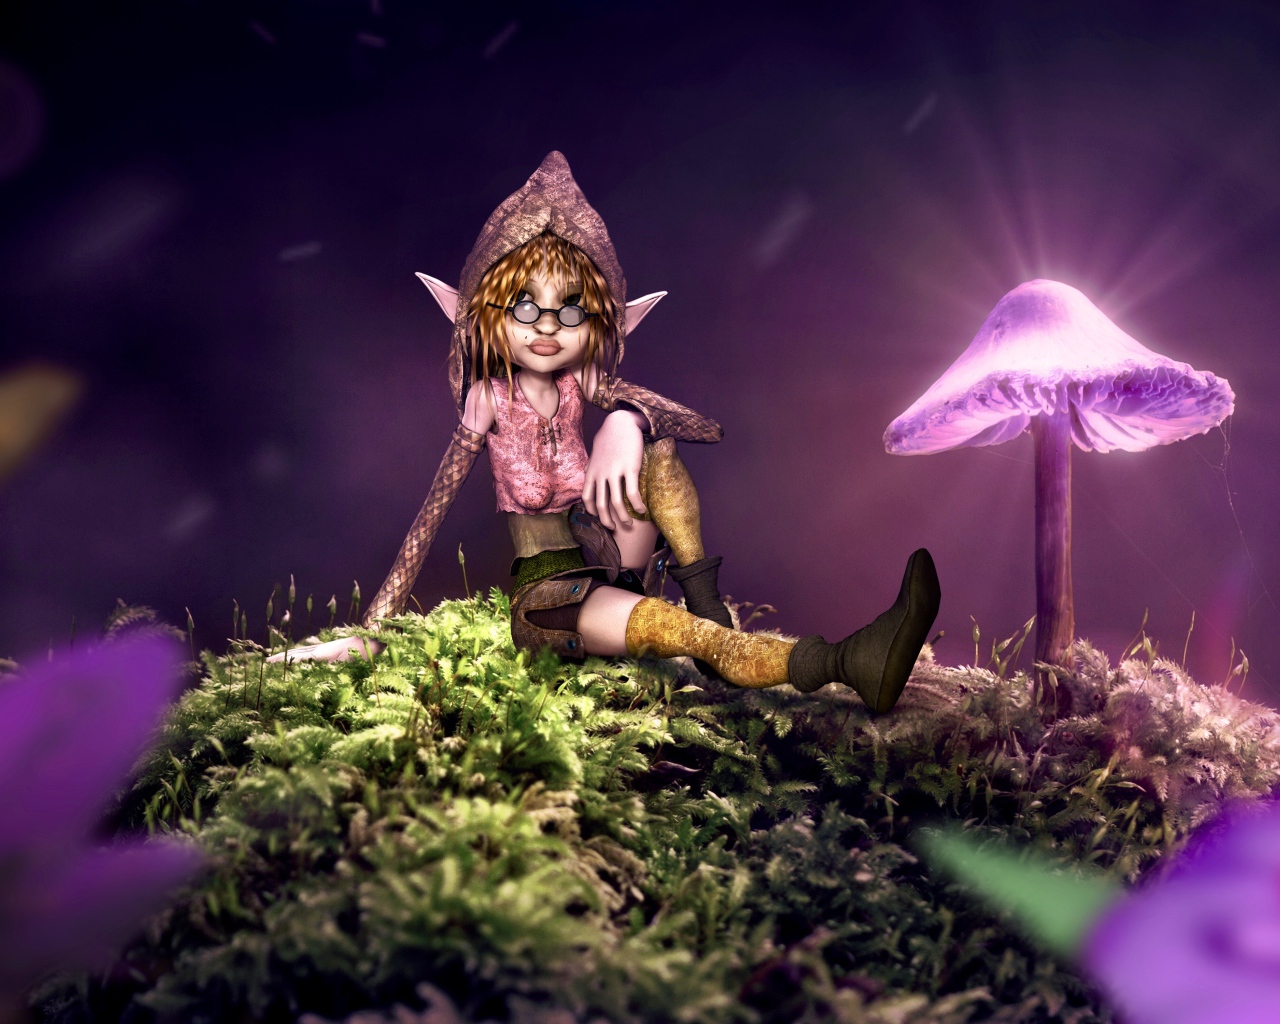 Fantastic elf sitting on mossy ground with neon mushrooms